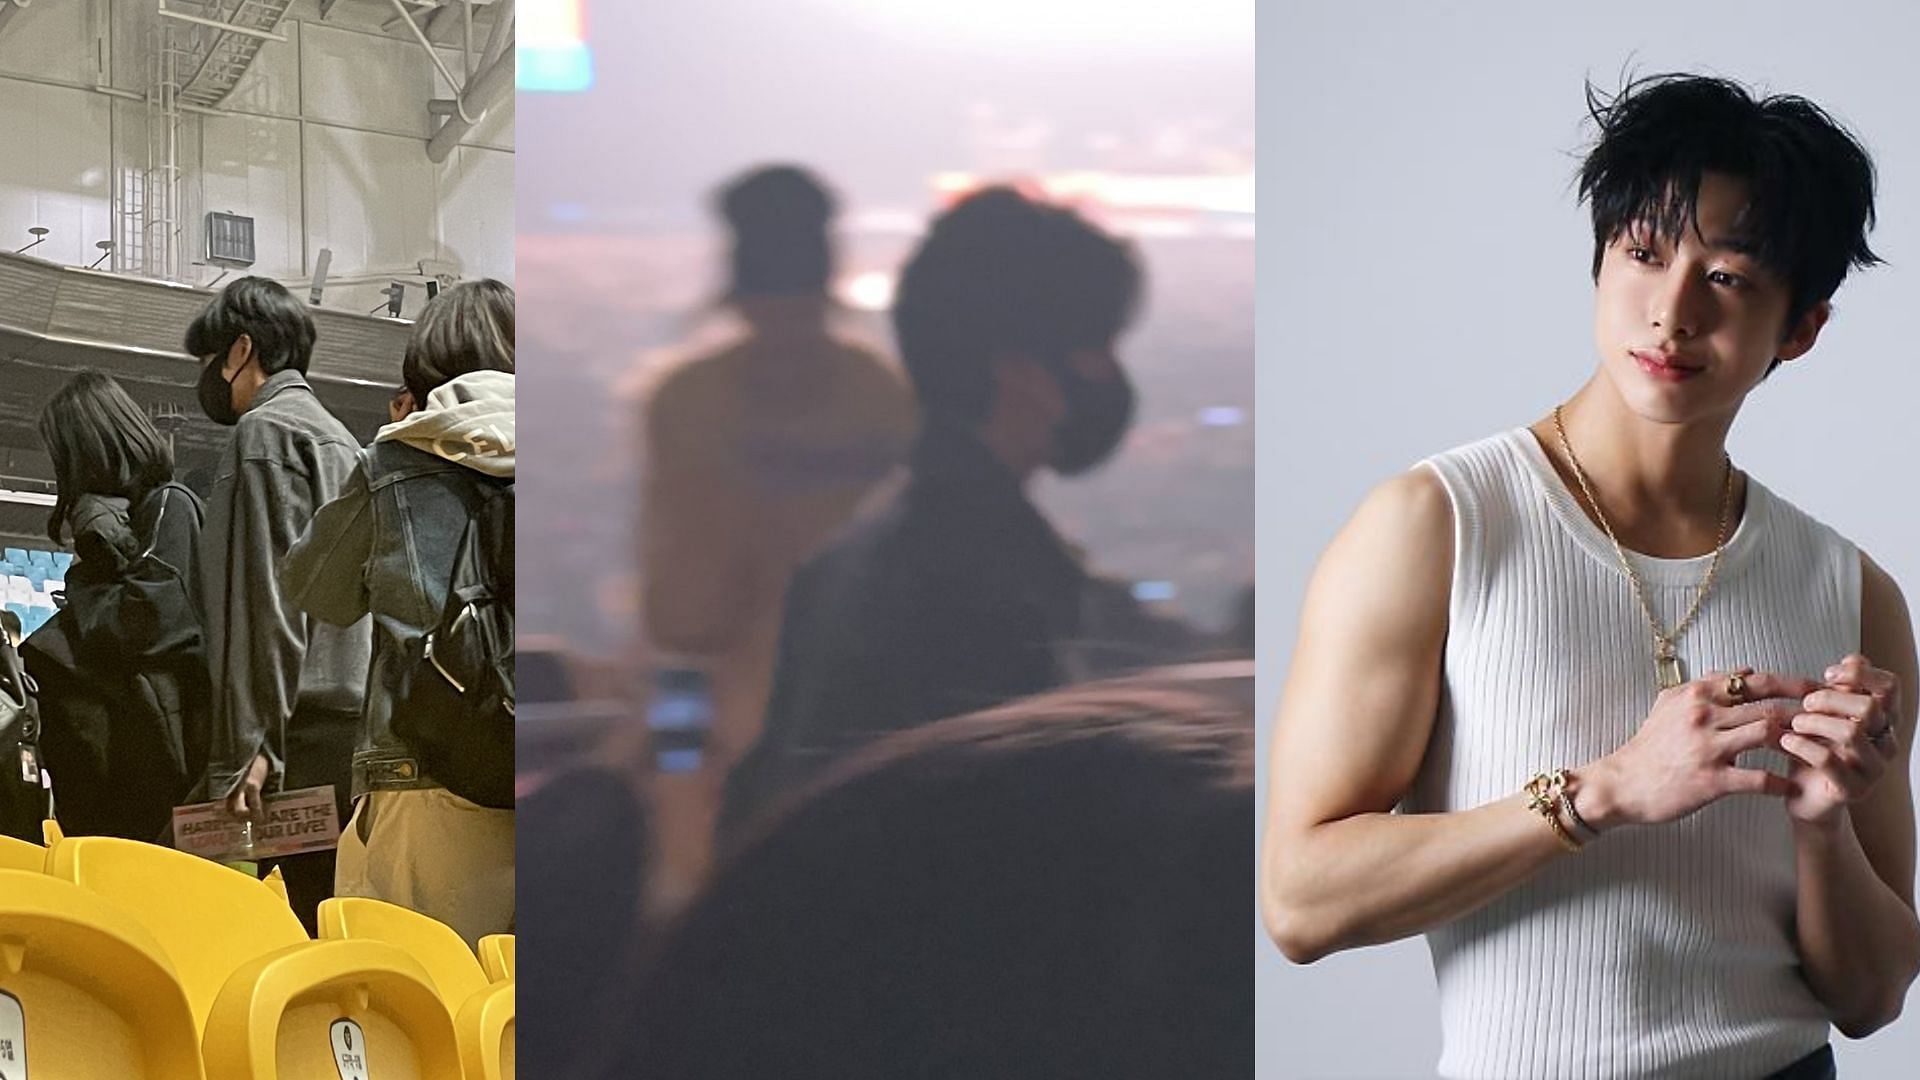 Fans of K-pop idol group MONSTA X spotted member Hyungwon (pictured extreme right) at the Seoul concert of Harry Styles, managing to snap a few pictures of his low-key appearance at the show. (Images via Twitter/ @margwonnie and @MonstaX___INA)